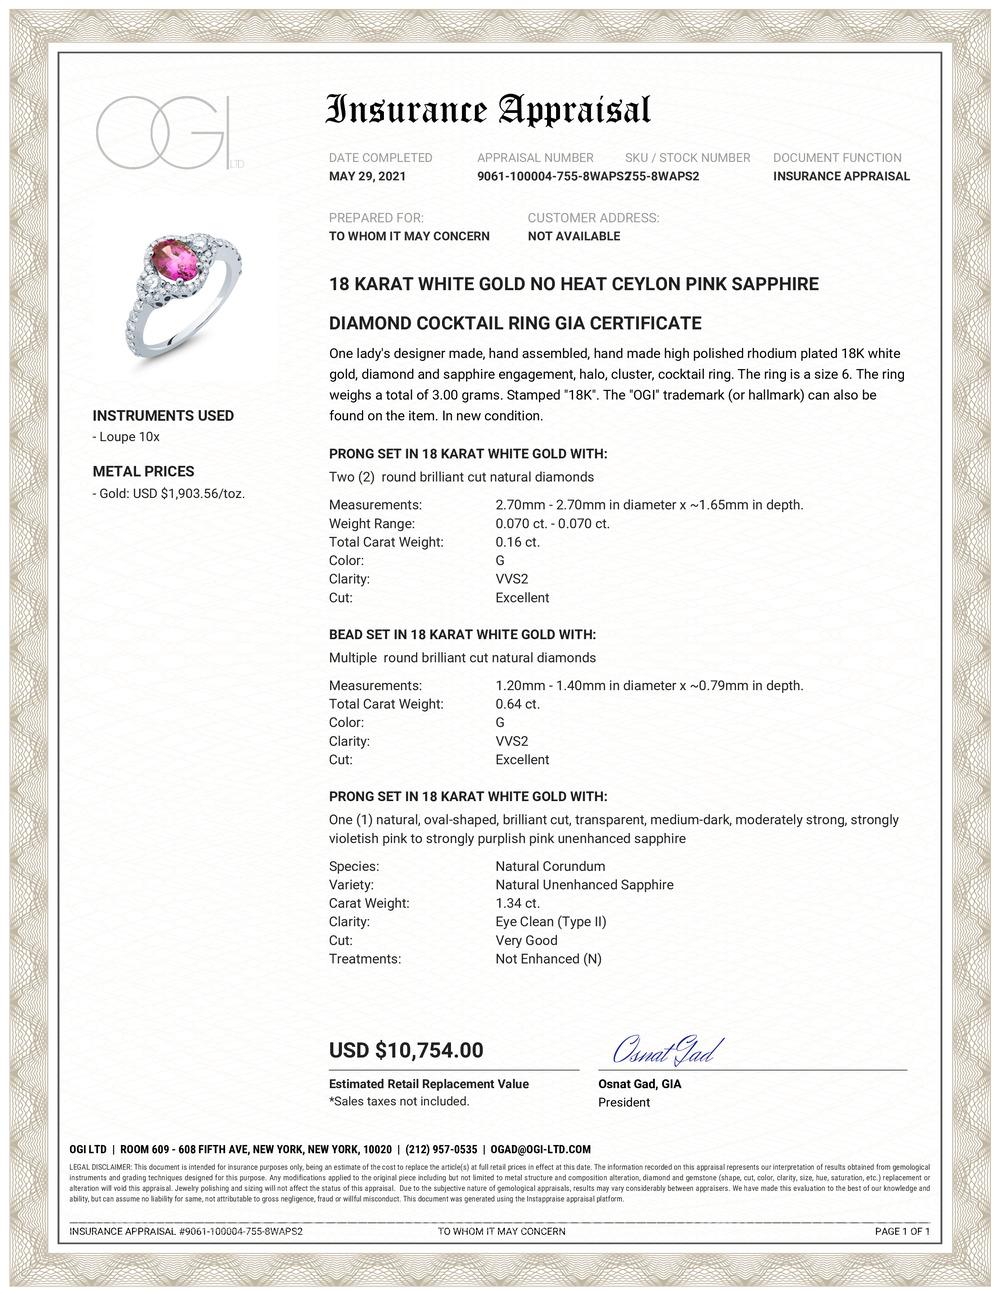 18 karats white gold GIA certified, one of a kind cocktail ring
Sri Lanka Pink Sapphire weighing 1.34 carat no indication of heat 
Surrounded by pave-set diamonds weighing 0.80 carat 
Diamond quality G VS
GIA certificate #1172261169
New ring 
GIA